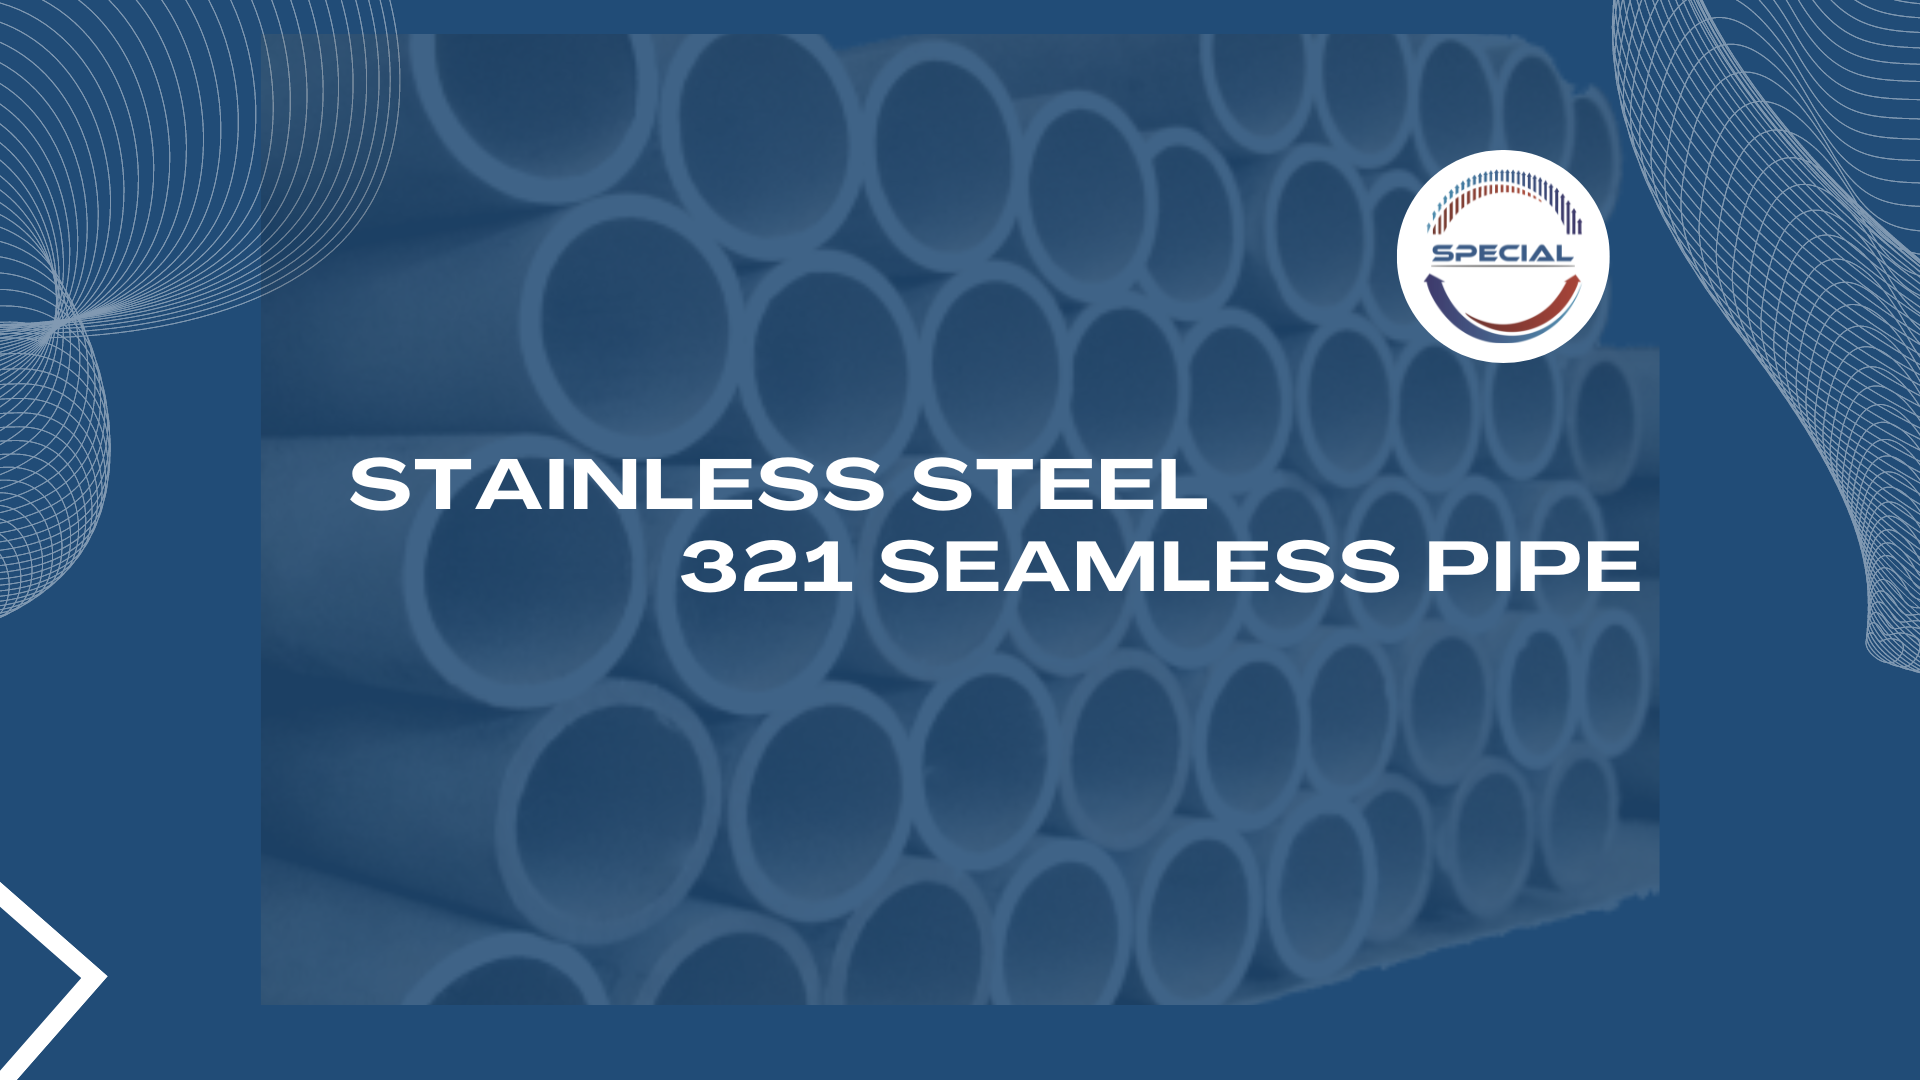 Stainless steel 321 seamless pipe